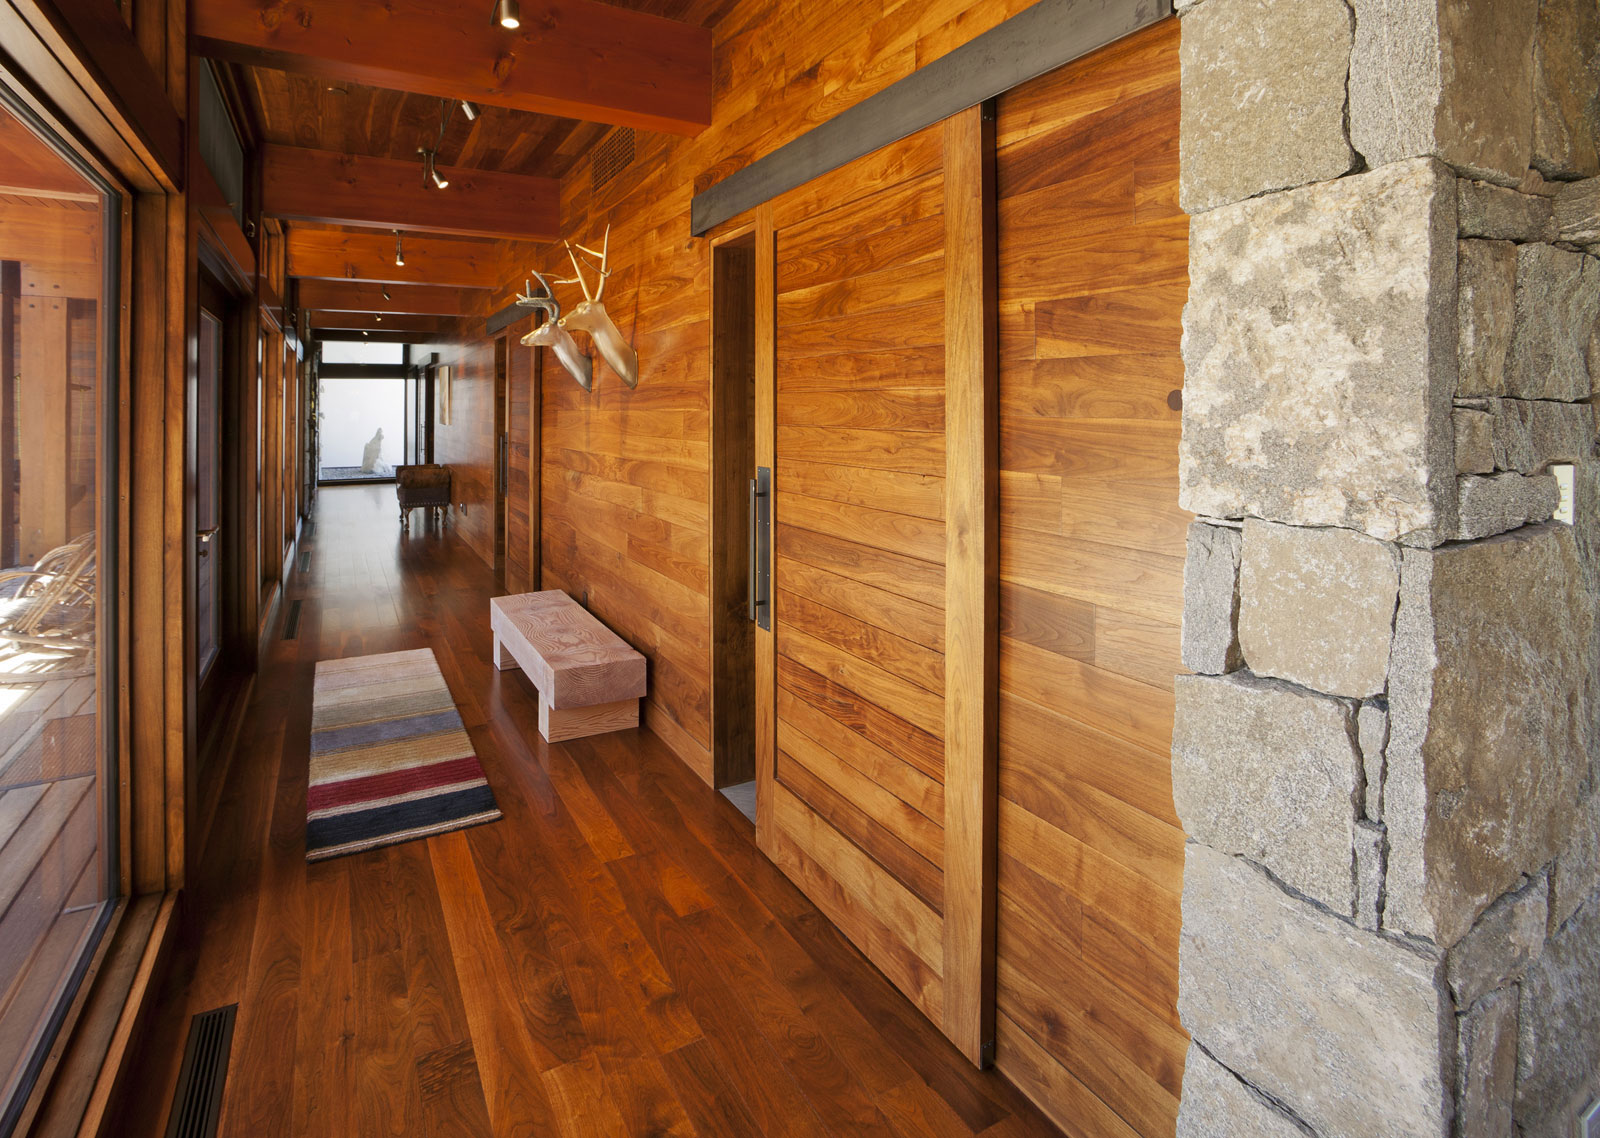 Entrance Applying Also Enchanting Entrance Applying Wooden Wall Also Flooring With Sliding Interior Wood Doors And Furnished With Faux Deer Head Of Wall Decorations And Completed With Bench Interior Design The Possible Combination Of The Interior Wood Doors